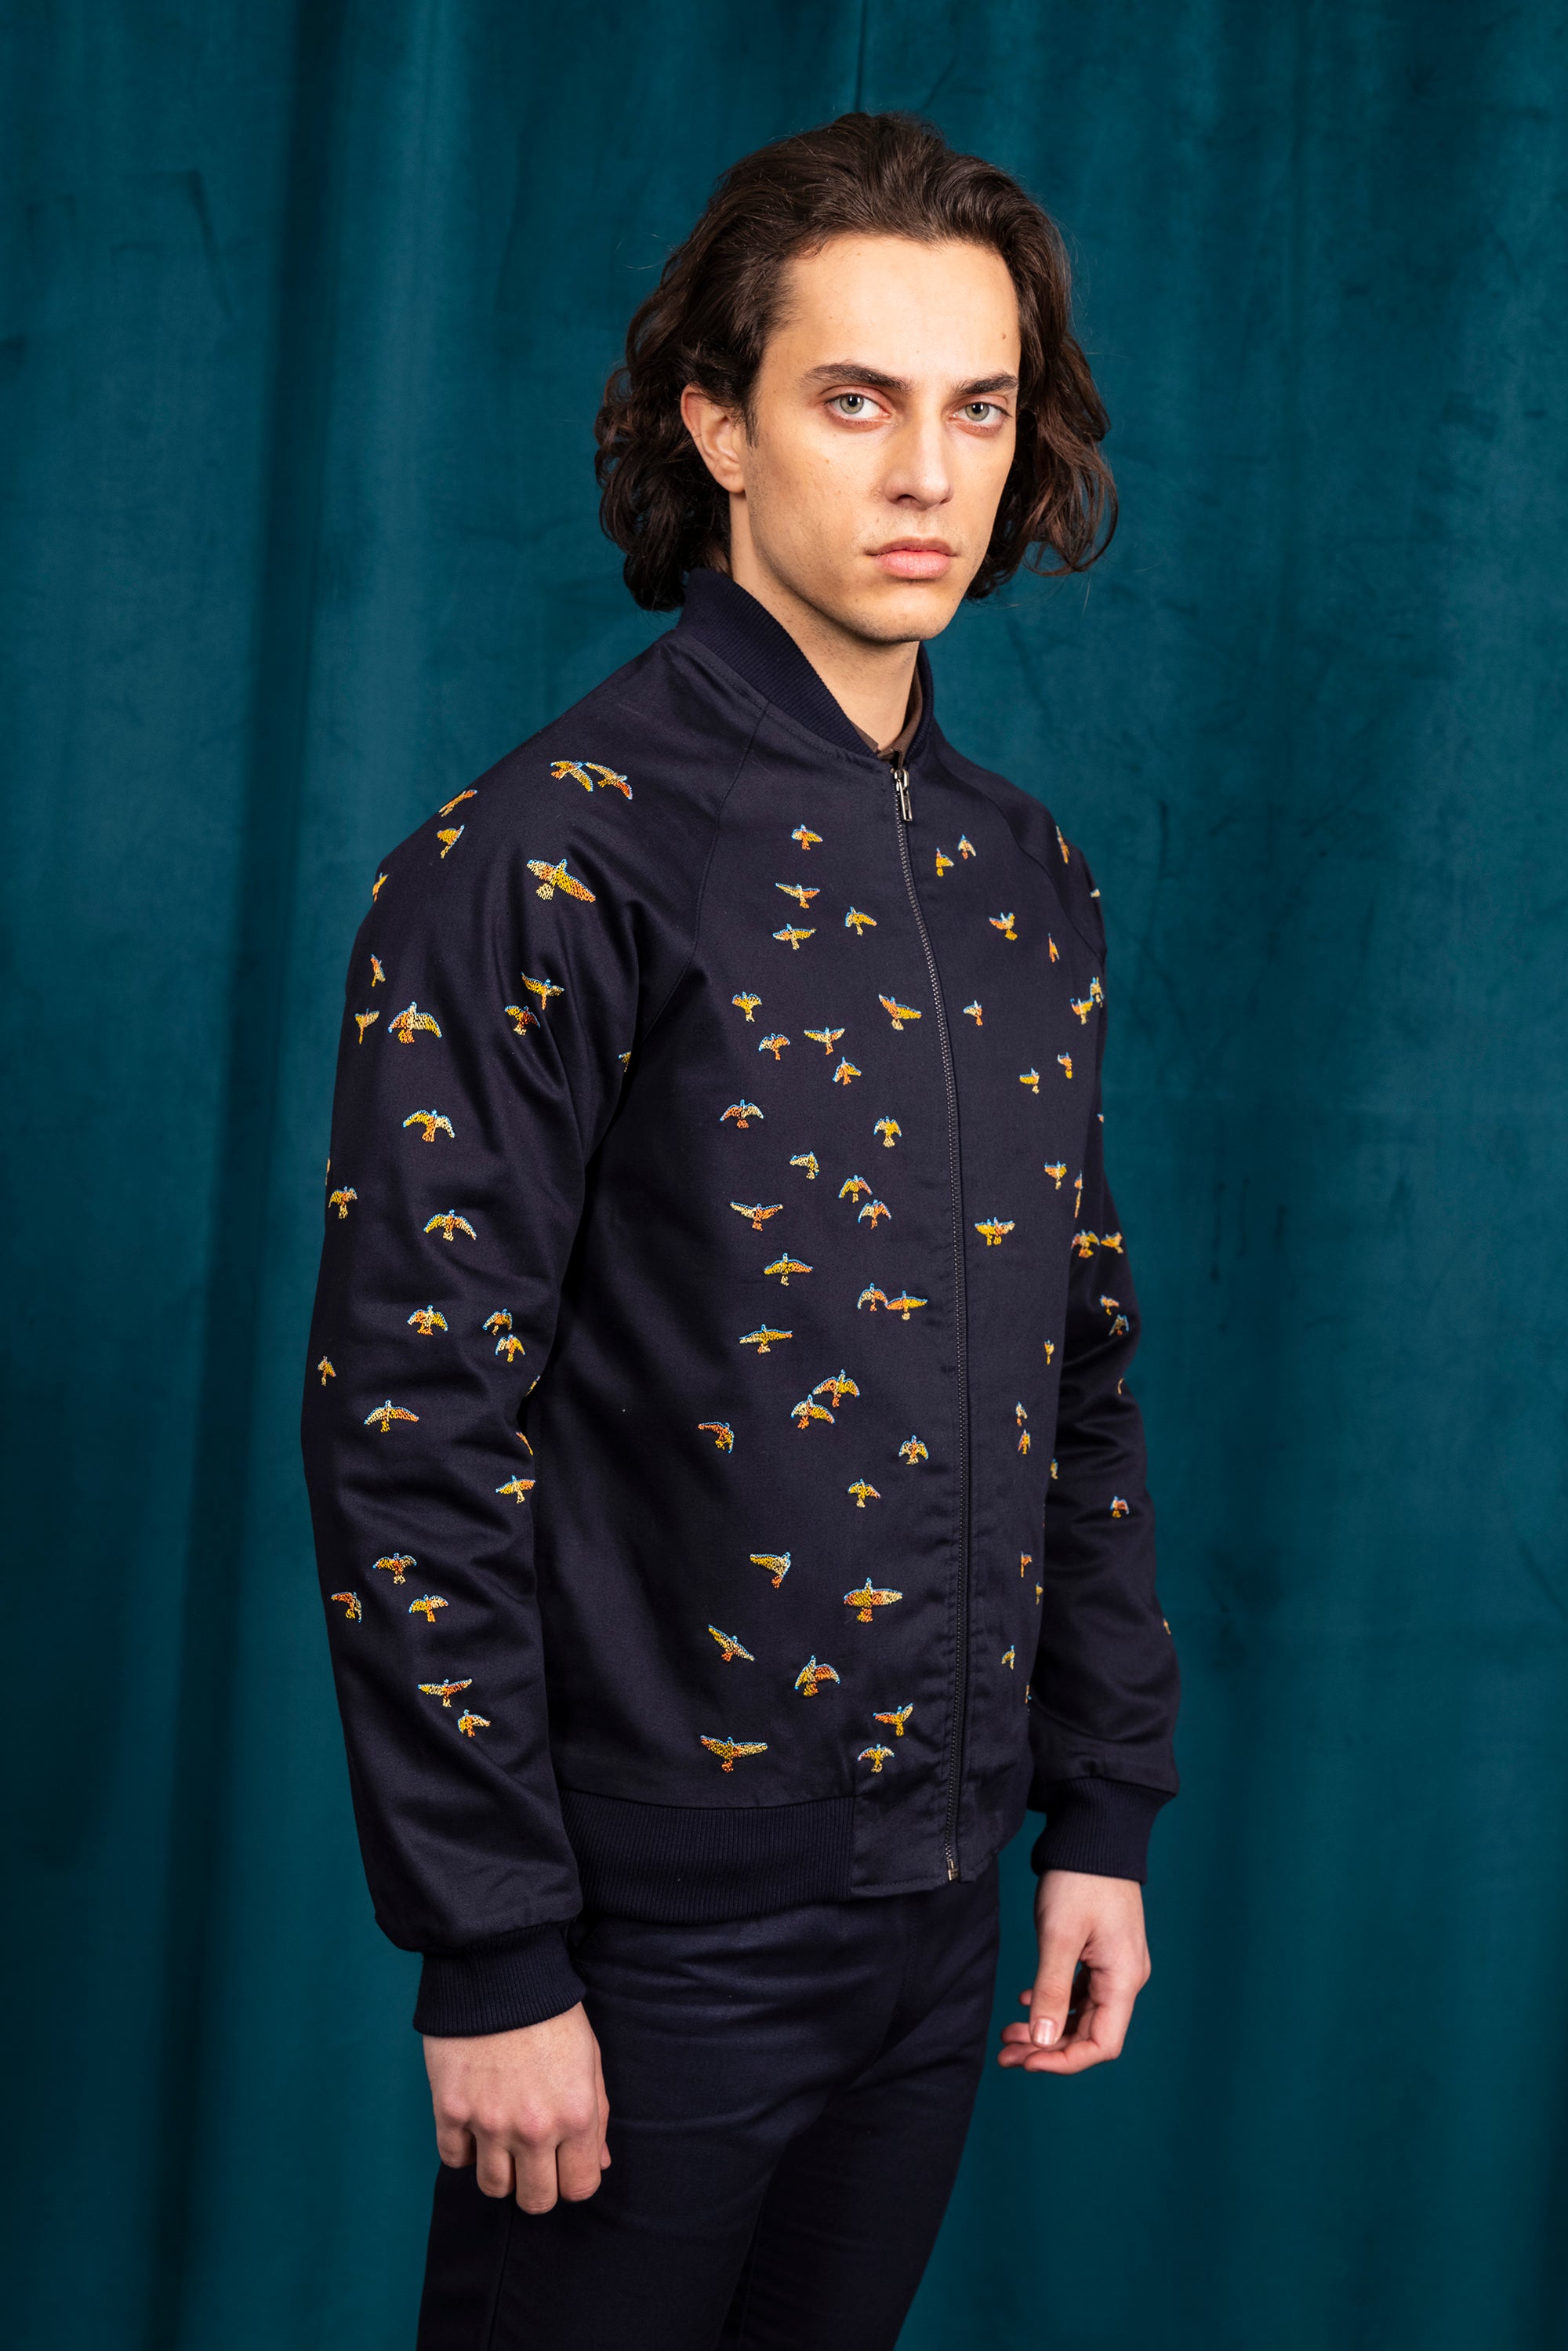 Men's navy blue coat with all-over bird embroidery